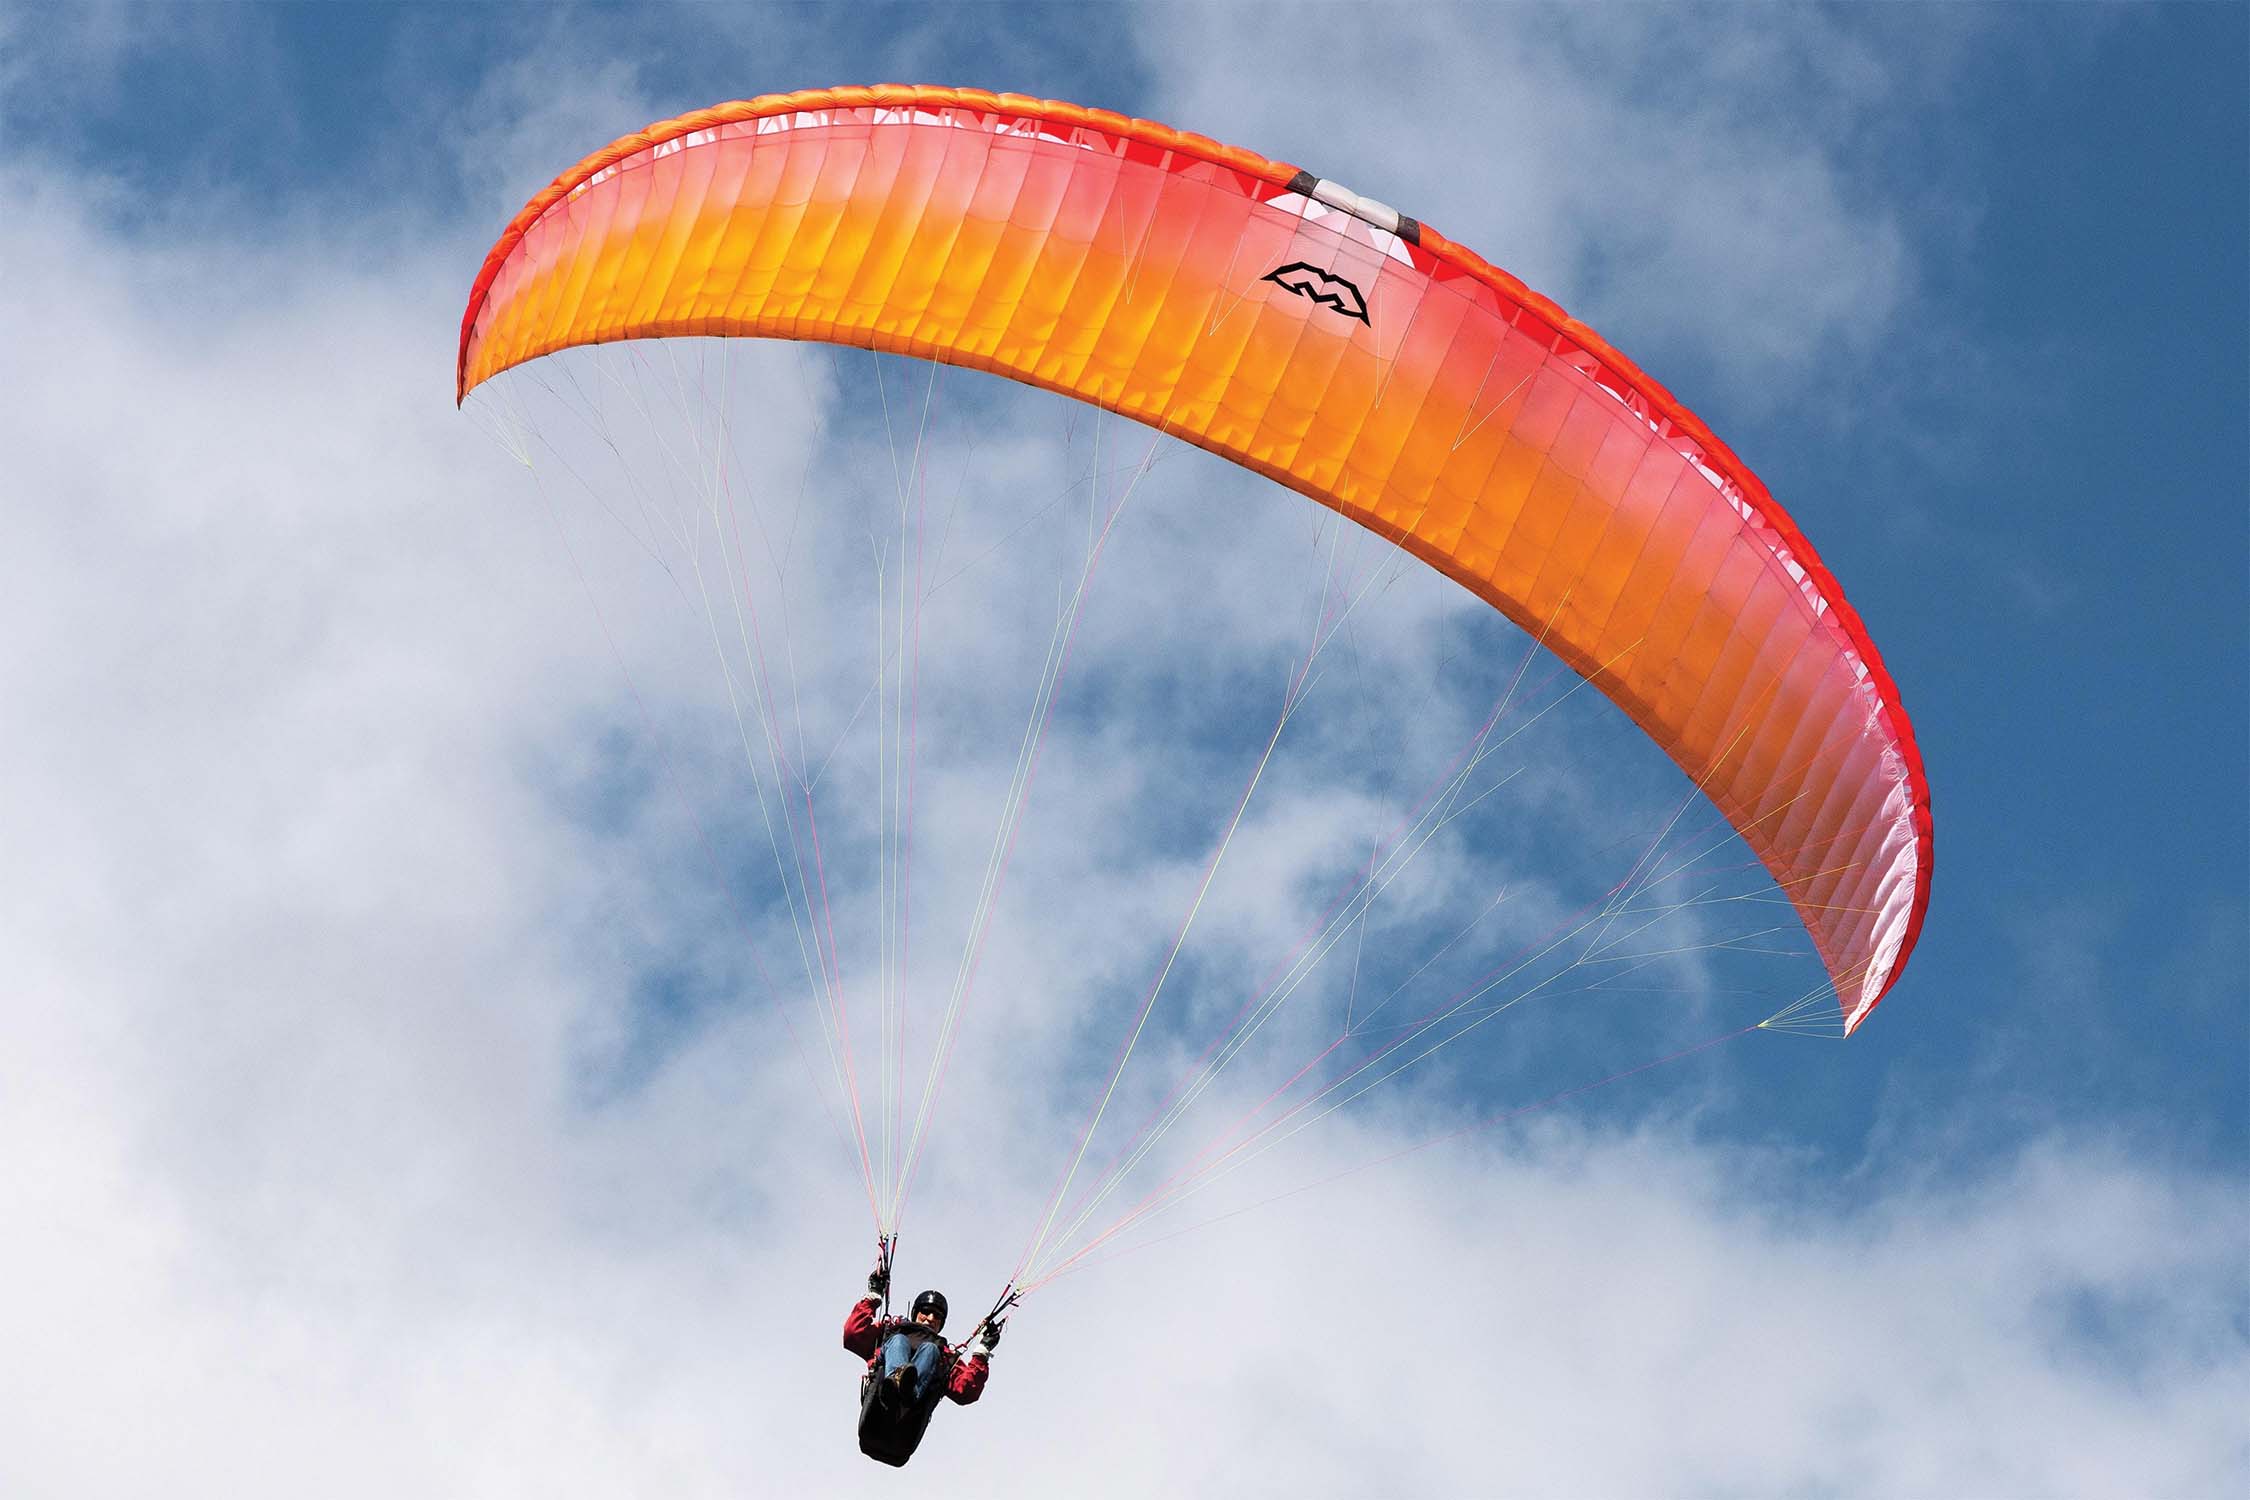 Powered Paragliding in Pune